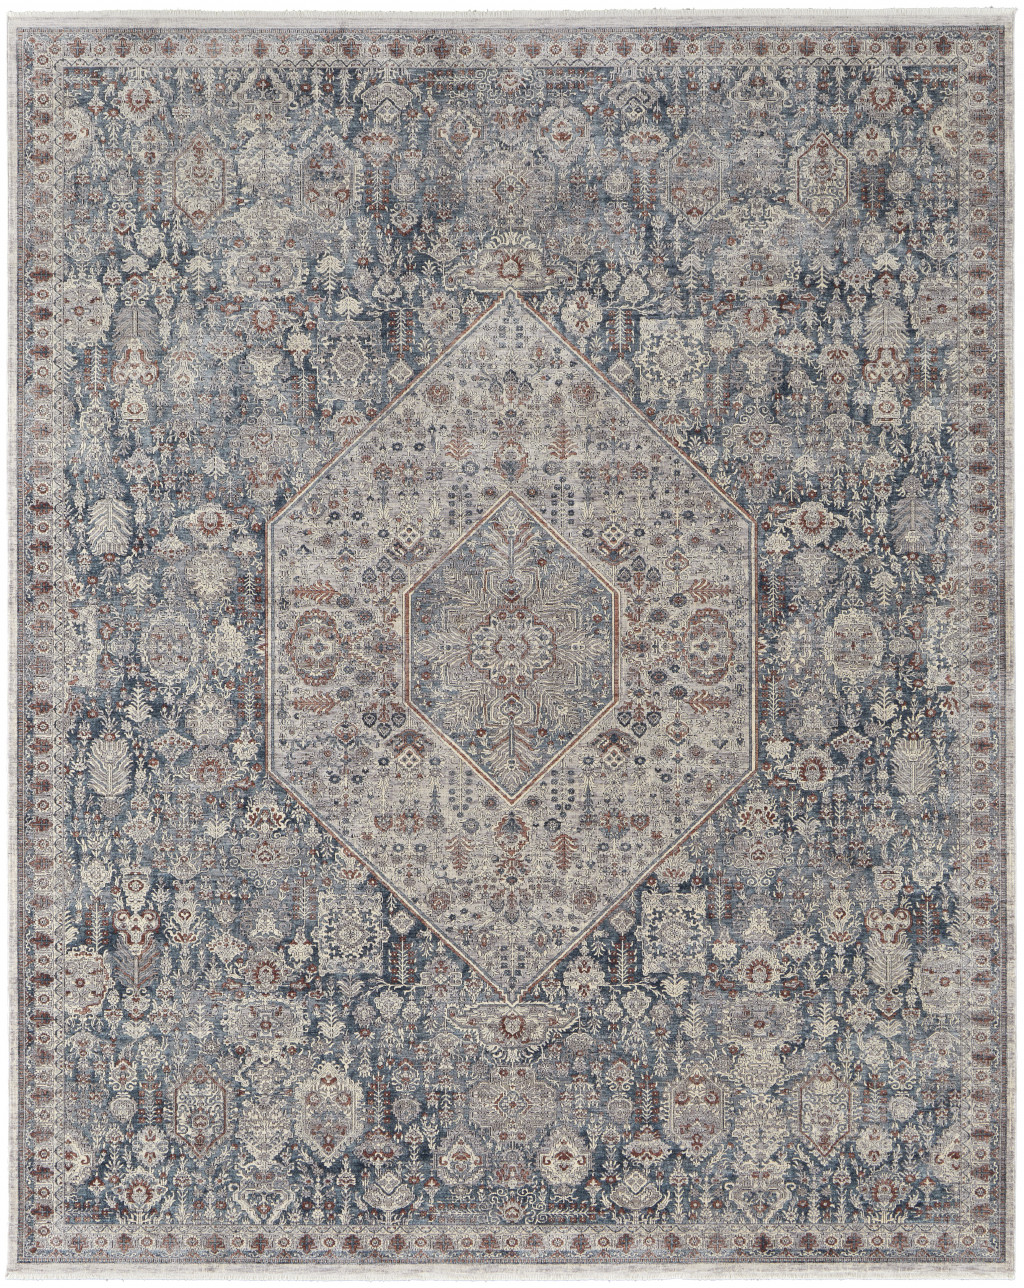 5' X 7' Blue And Ivory Floral Power Loom Stain Resistant Area Rug-514474-1